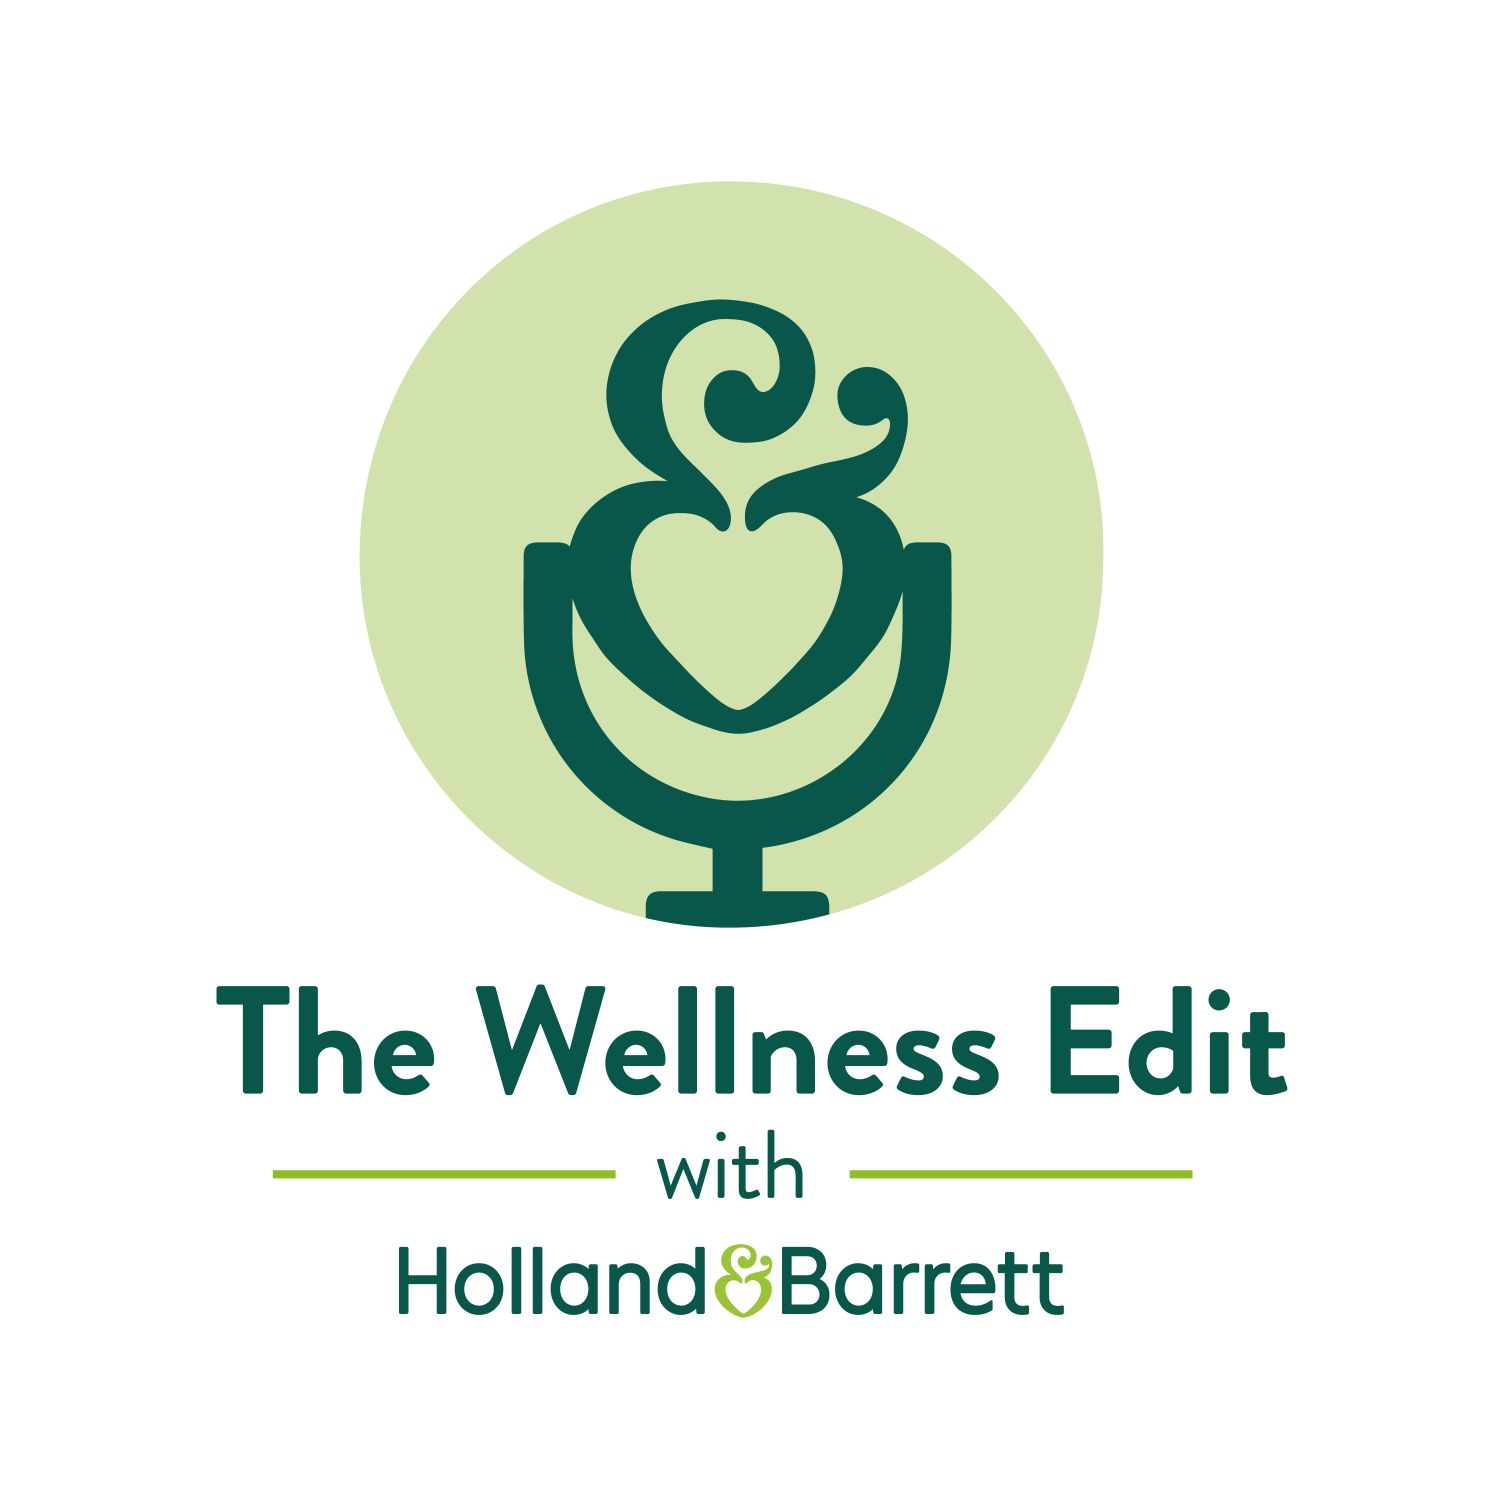 Harnessing the healing powers of food, with Dr Rupy